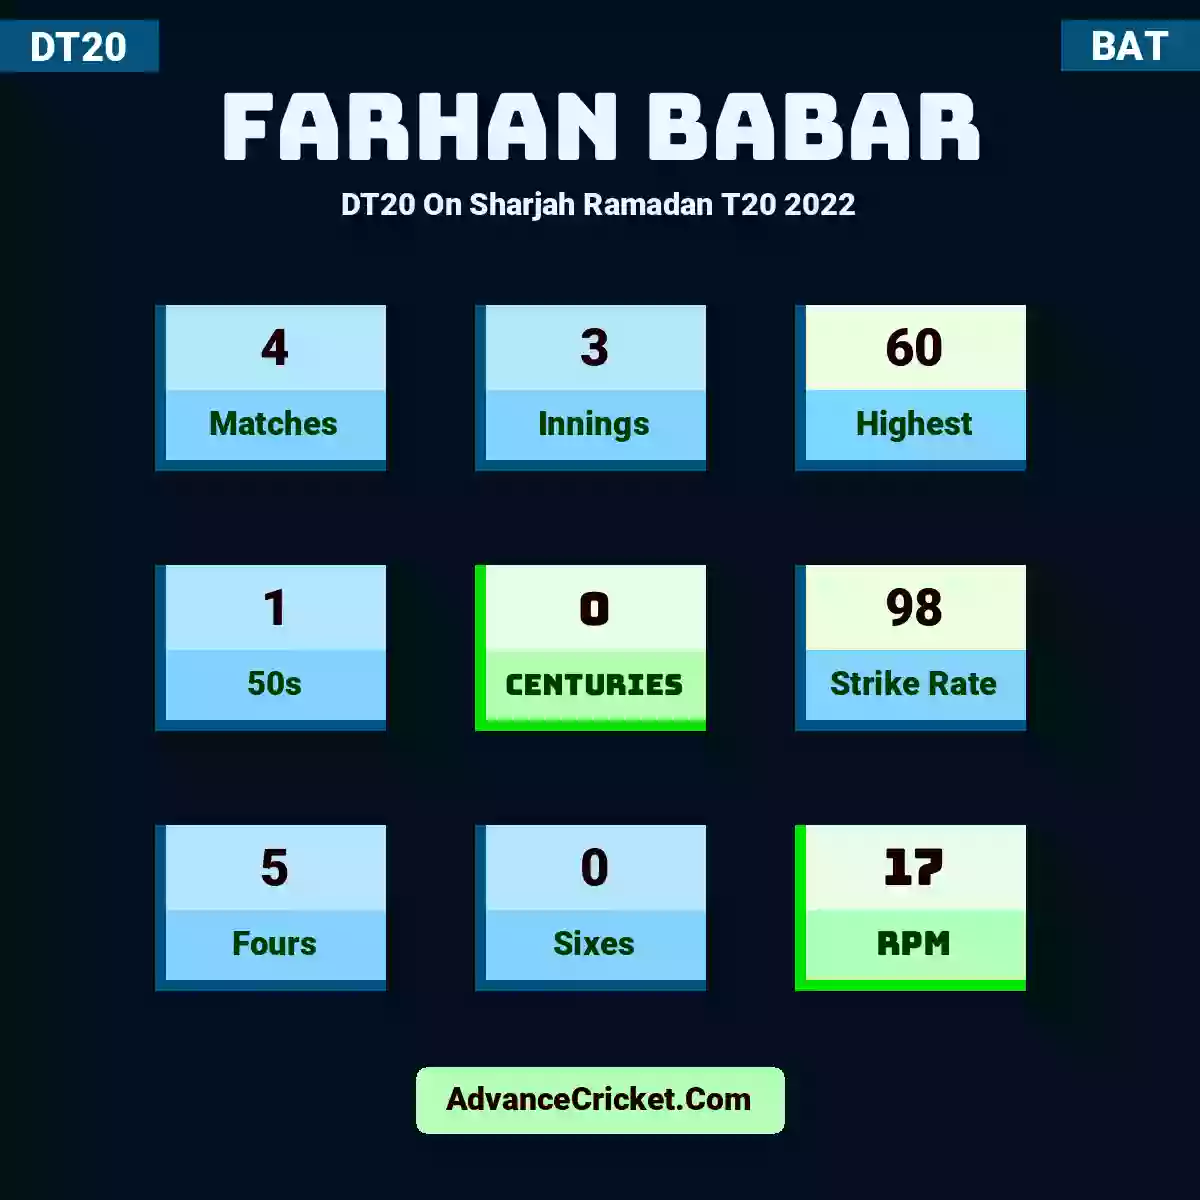 Farhan Babar DT20  On Sharjah Ramadan T20 2022, Farhan Babar played 4 matches, scored 60 runs as highest, 1 half-centuries, and 0 centuries, with a strike rate of 98. F.Babar hit 5 fours and 0 sixes, with an RPM of 17.